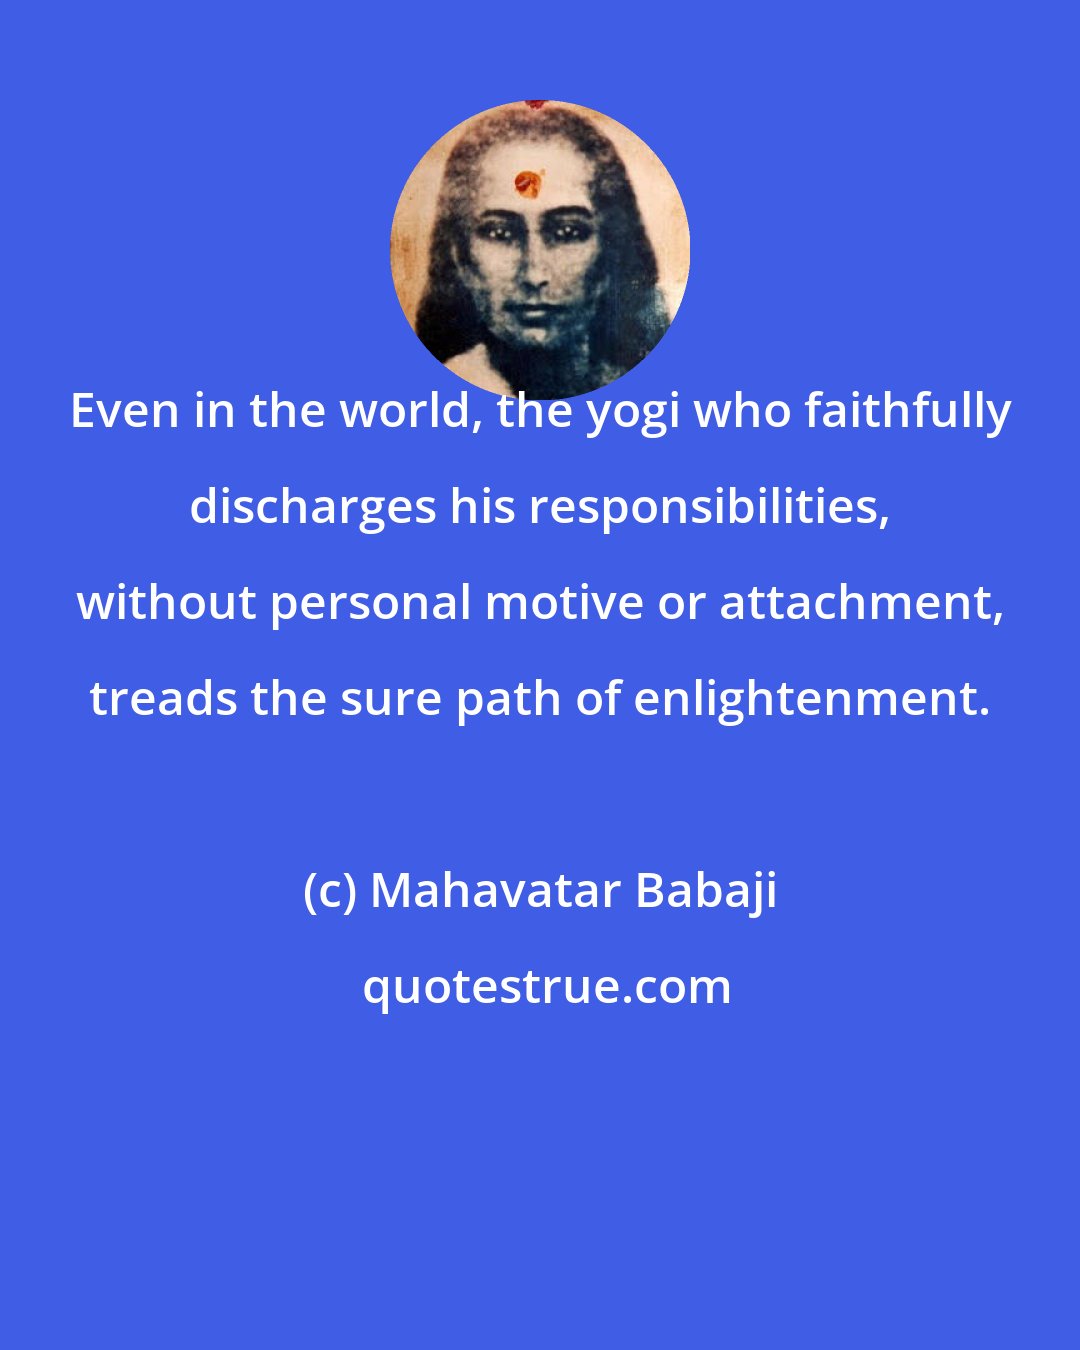 Mahavatar Babaji: Even in the world, the yogi who faithfully discharges his responsibilities, without personal motive or attachment, treads the sure path of enlightenment.